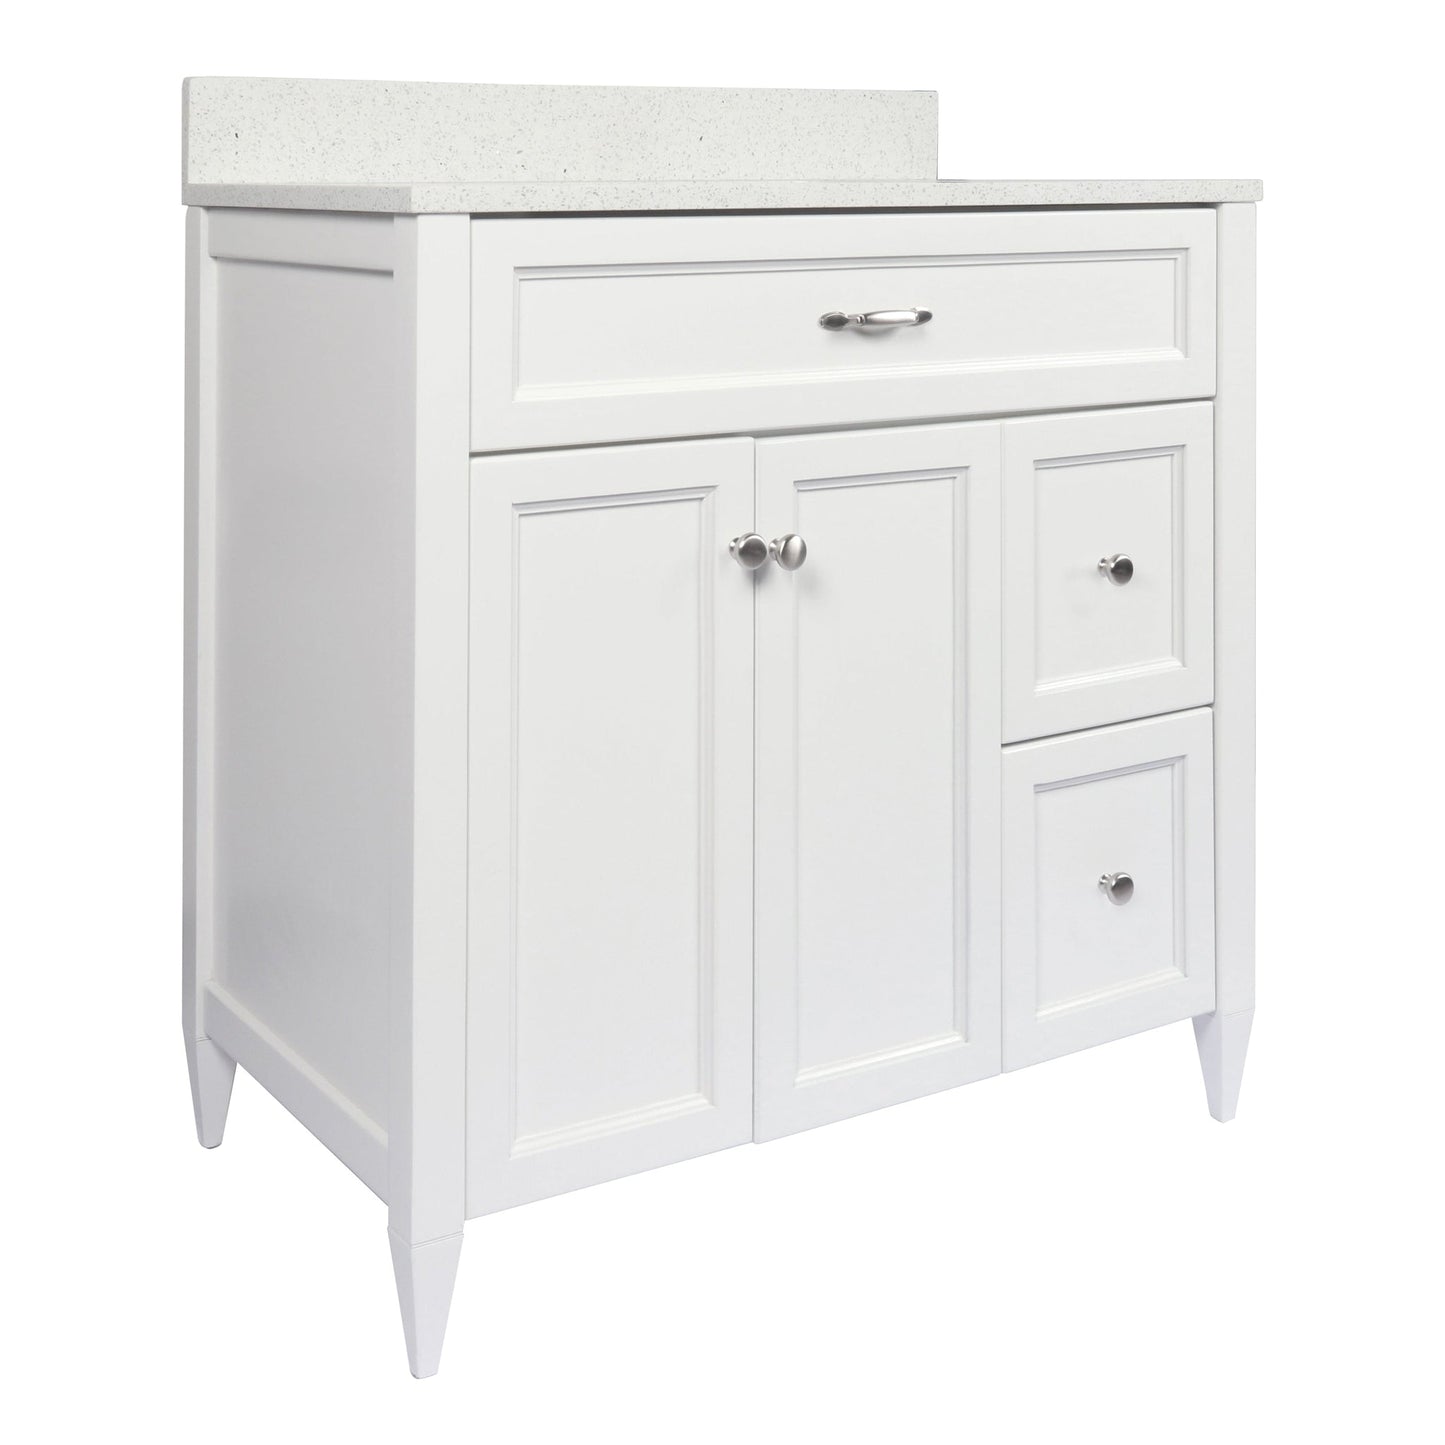 Ella’s Bubbles Vail 37" White Bathroom Vanity With Galaxy White Quartz Stone Top With Backsplash and Sink